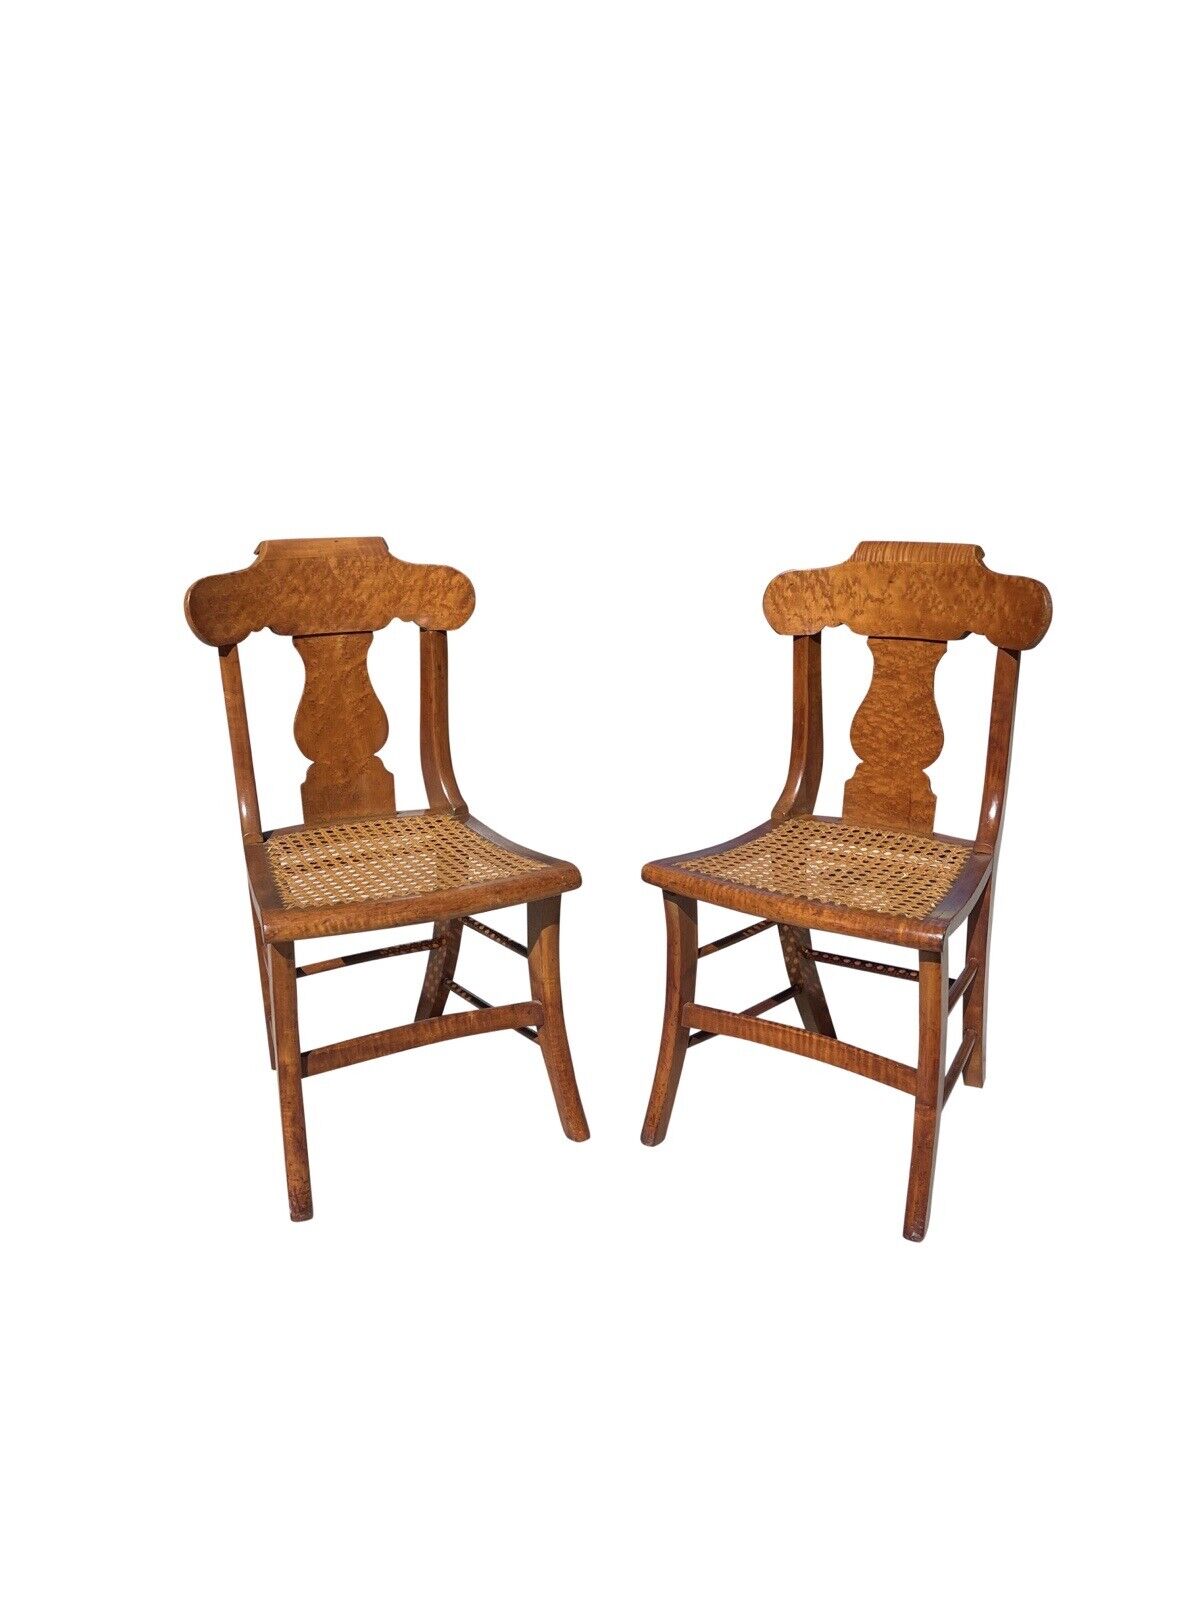 Antique Set of 4 Curly Maple & Birds Eye Maple Saber Leg Dining Chairs